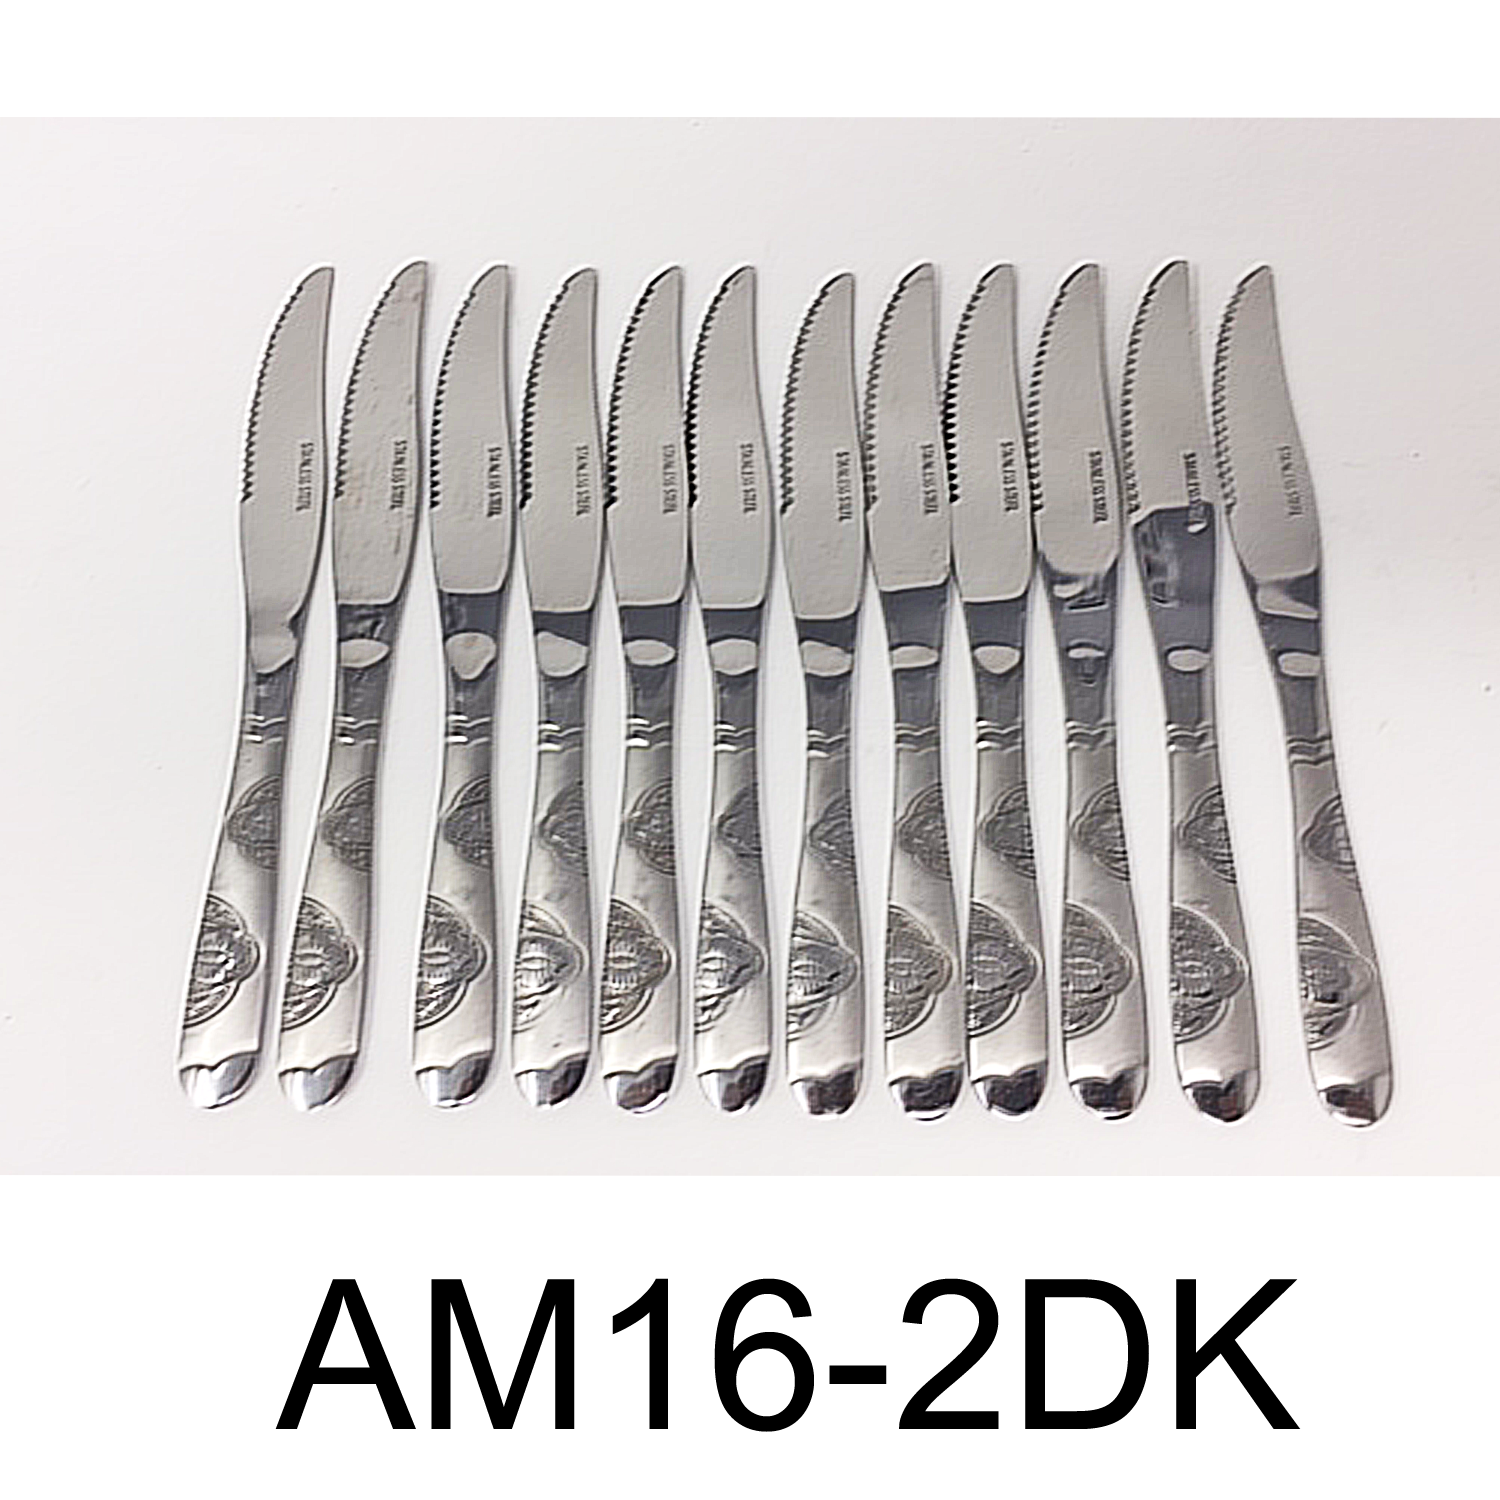 12 PC Wavy Cloud Design Stainless Steel Silver Dinner Knife – R